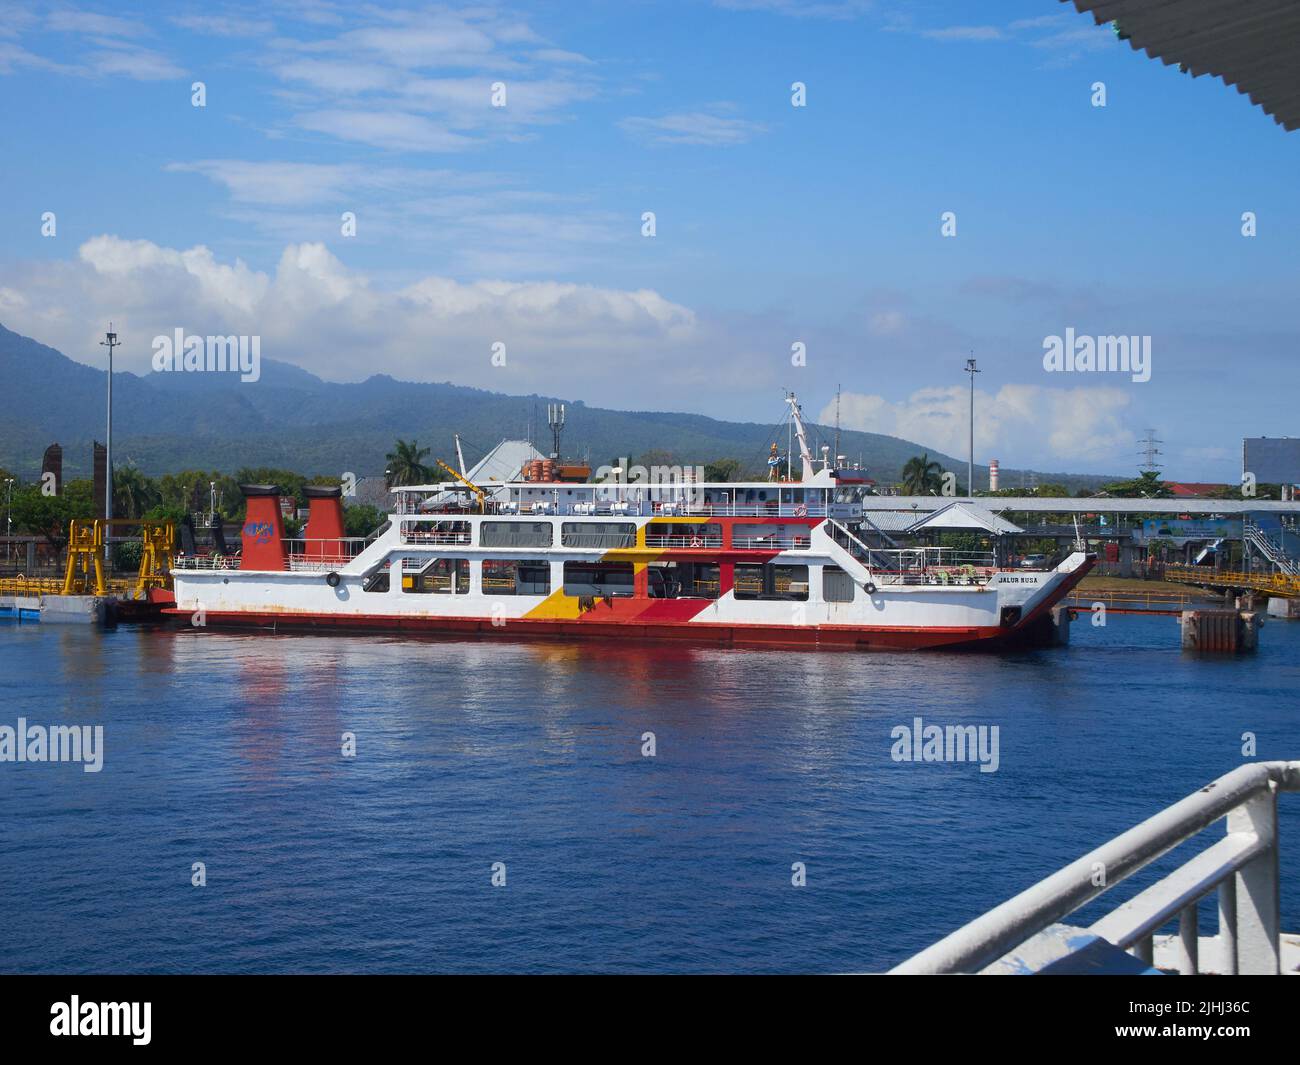 Bali, Indonesia - July 2, 2022 : A ferry at the port of Gilimanuk,  Indonesia that will carry passengers from the island of Bali to the island  of Java Stock Photo - Alamy